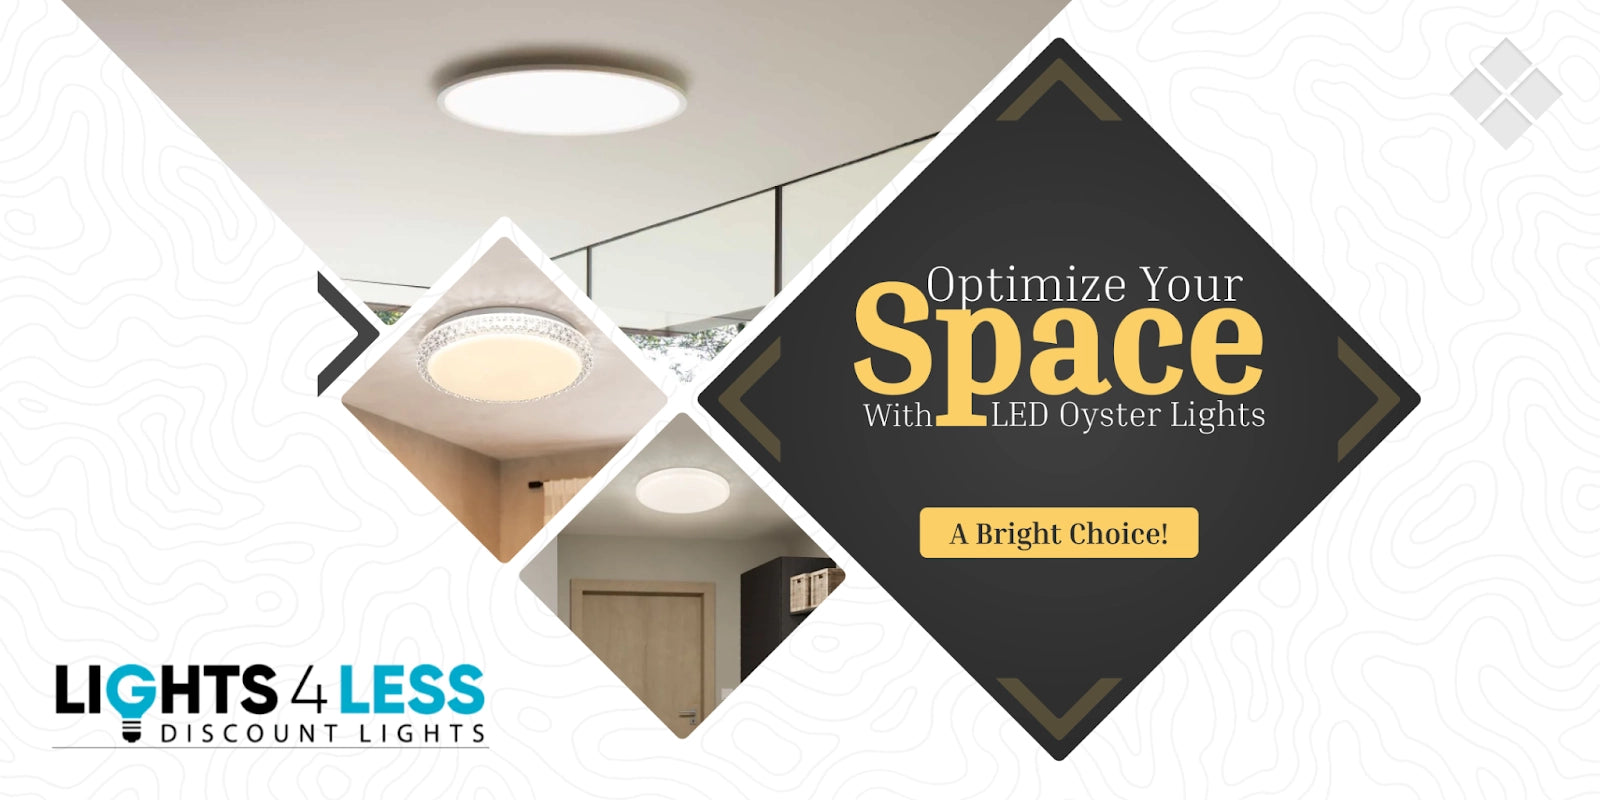 Why Use LED Oyster Lights for Your Space